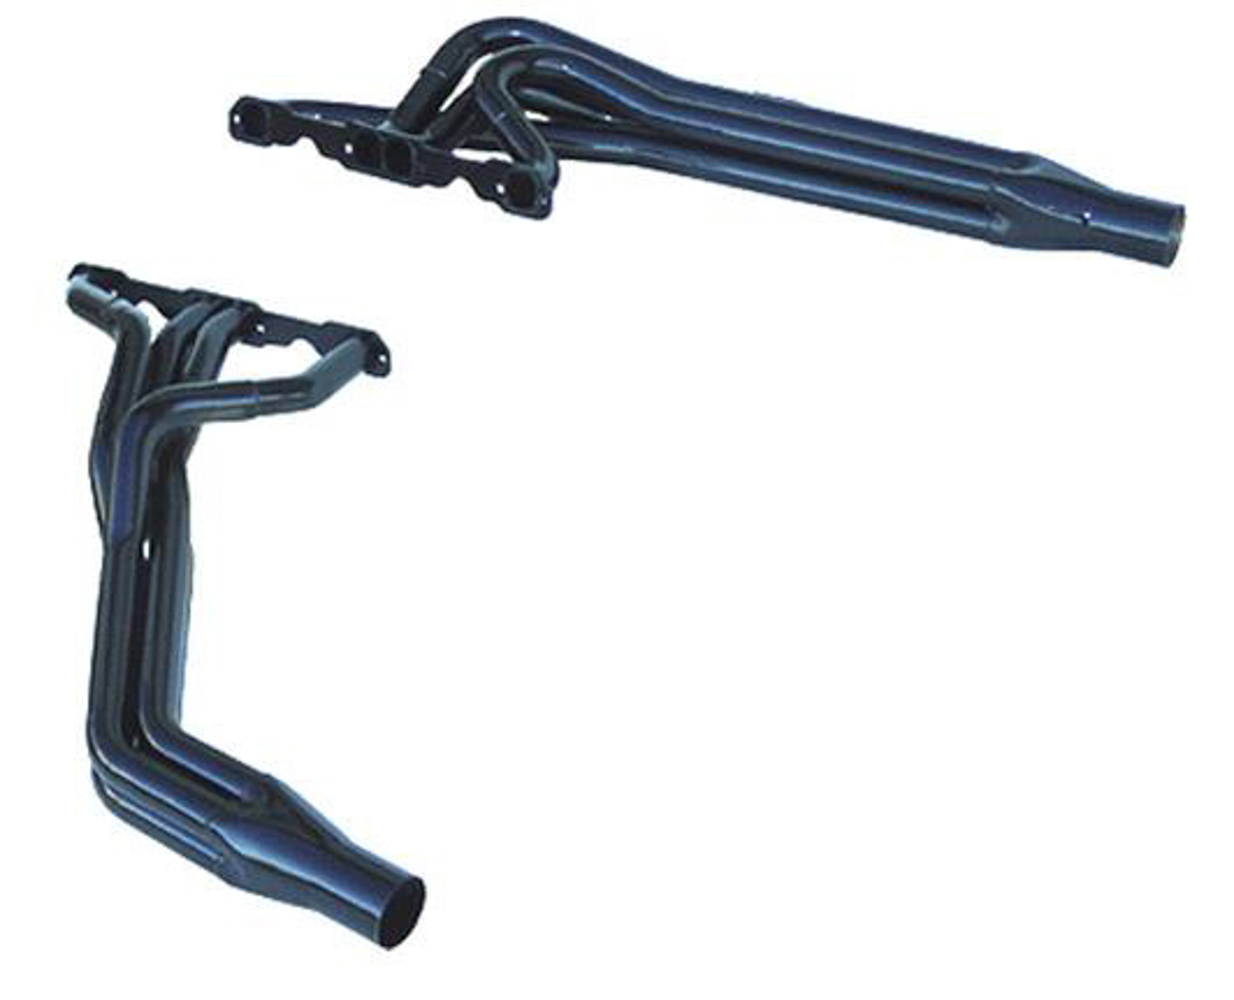 Schoenfeld Headers 182-606LVG - Headers, Dirt Late Model, 1-3/4 to 1-7/8 in Primary, 3-1/2 in Collector, Steel, Black Paint, Small Block Chevy, Kit